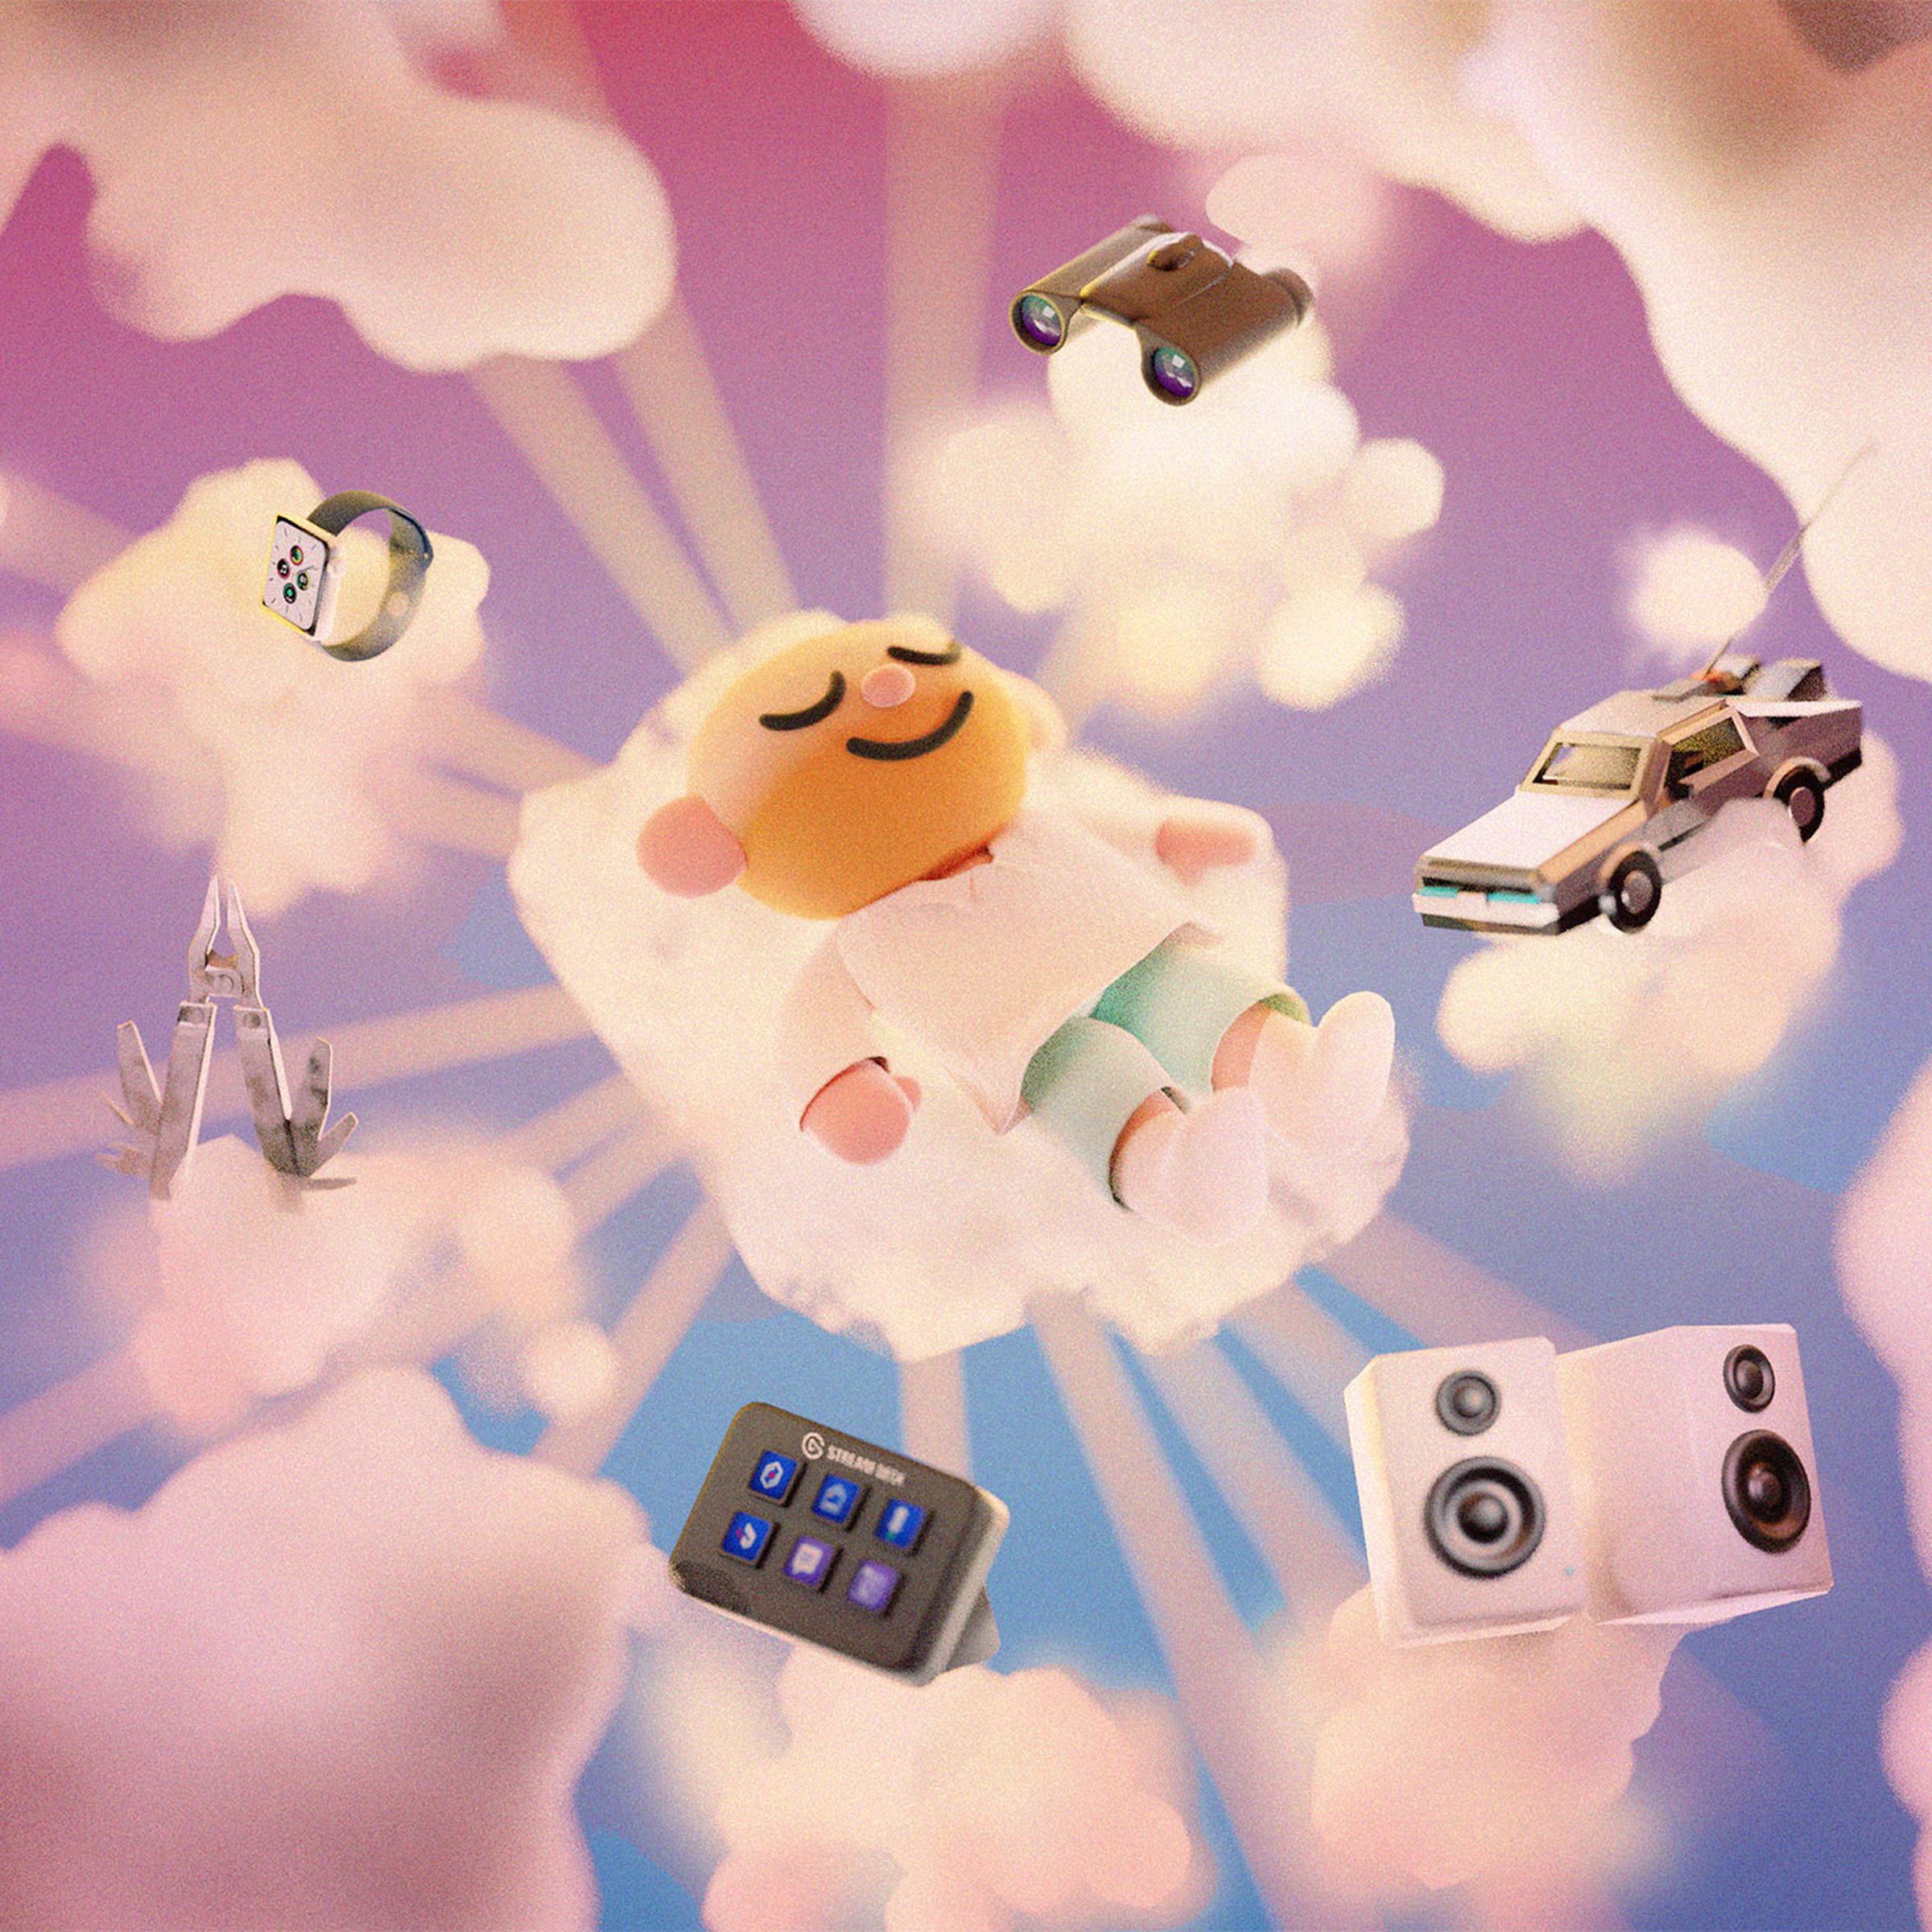 3D Illustration of a father relaxing on a cloud during sunset, surrounded by gifts.